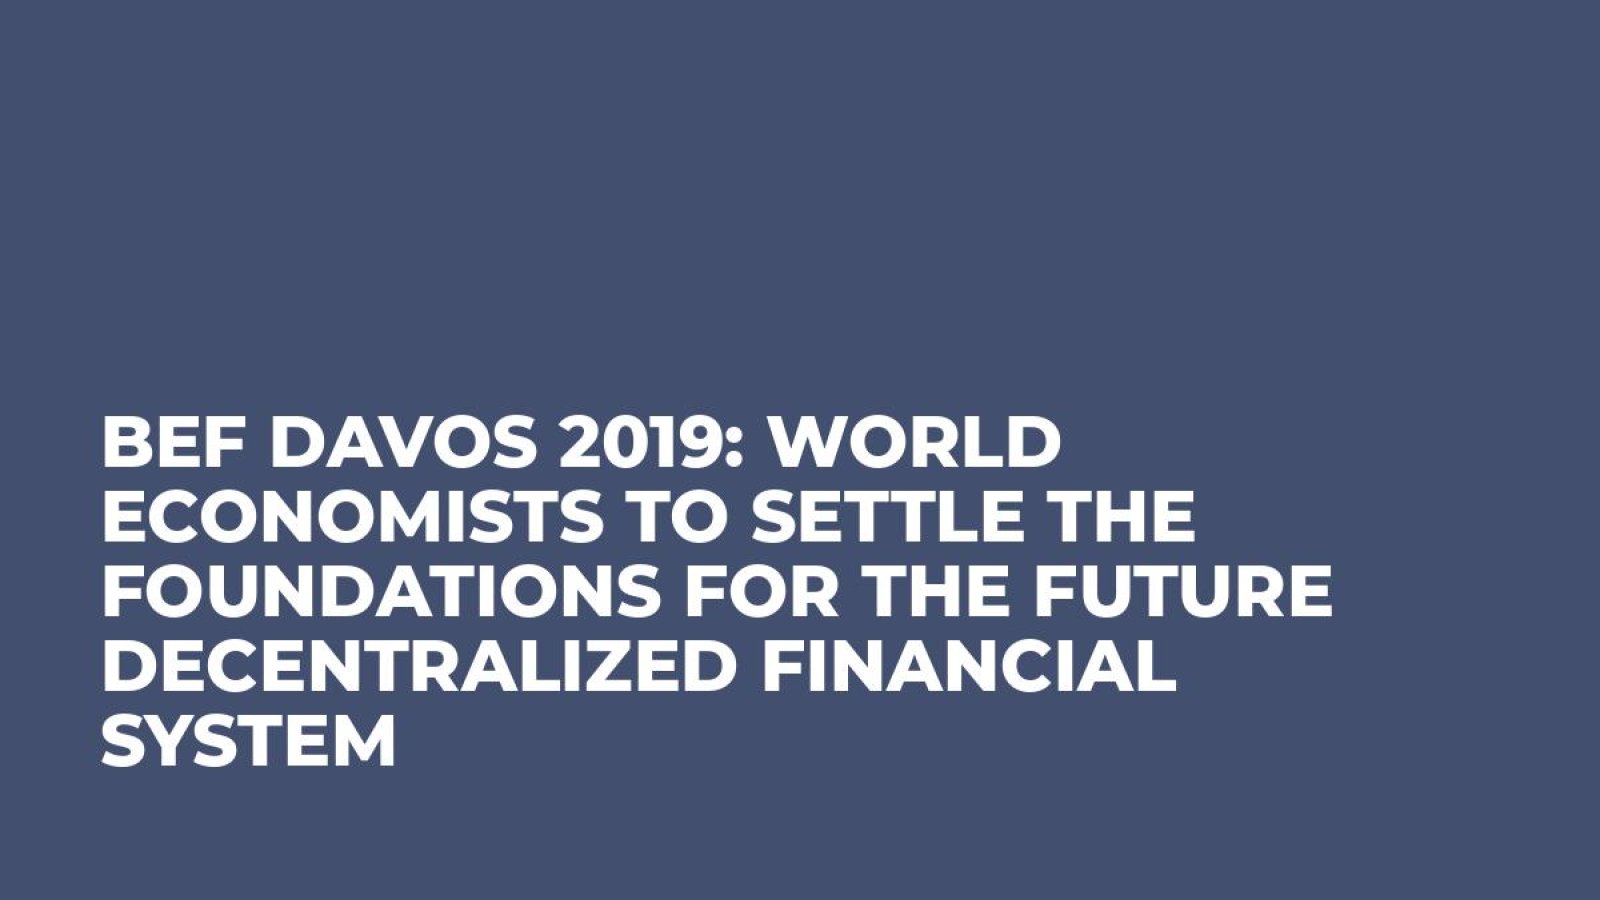 BEF Davos 2019: World Economists To Settle The Foundations For The Future Decentralized Financial System